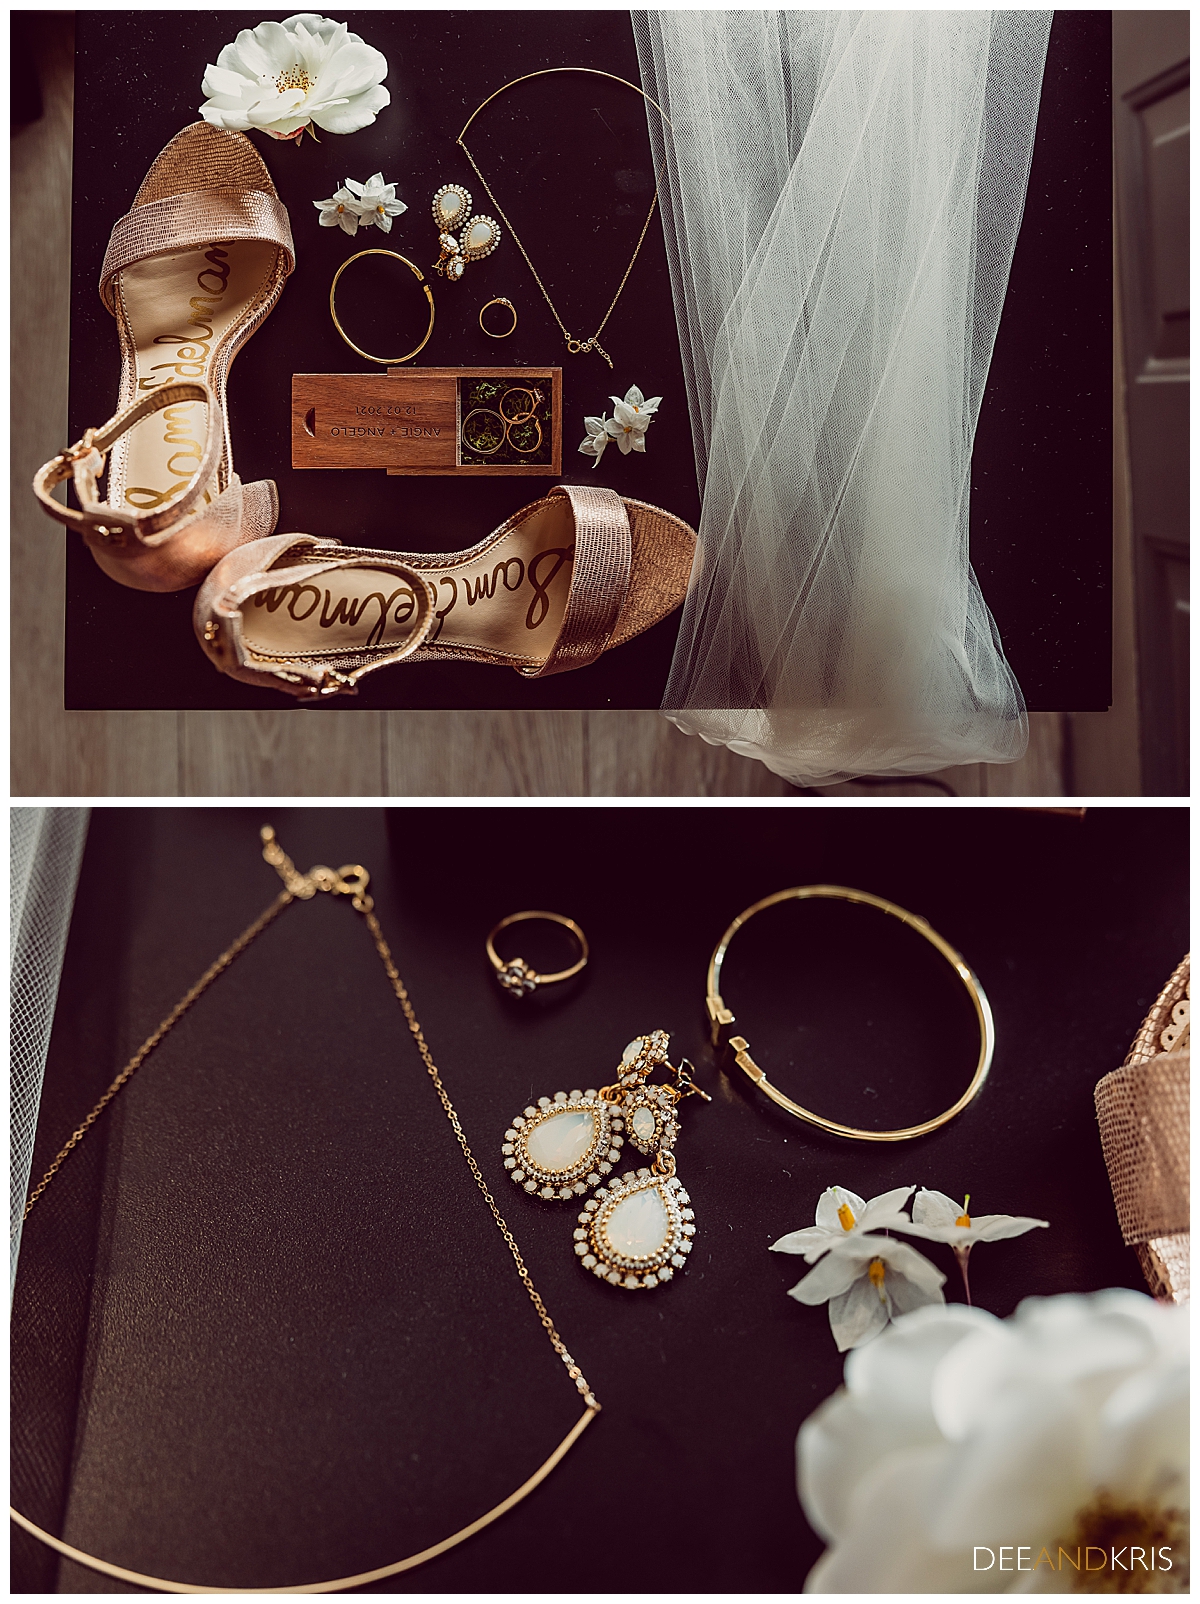 Two images: top image of details layflat spread showing shoes, veil, rings, jewelry and flowers. Bottom image close up of jewelry; necklace, earrings, and bracelet.